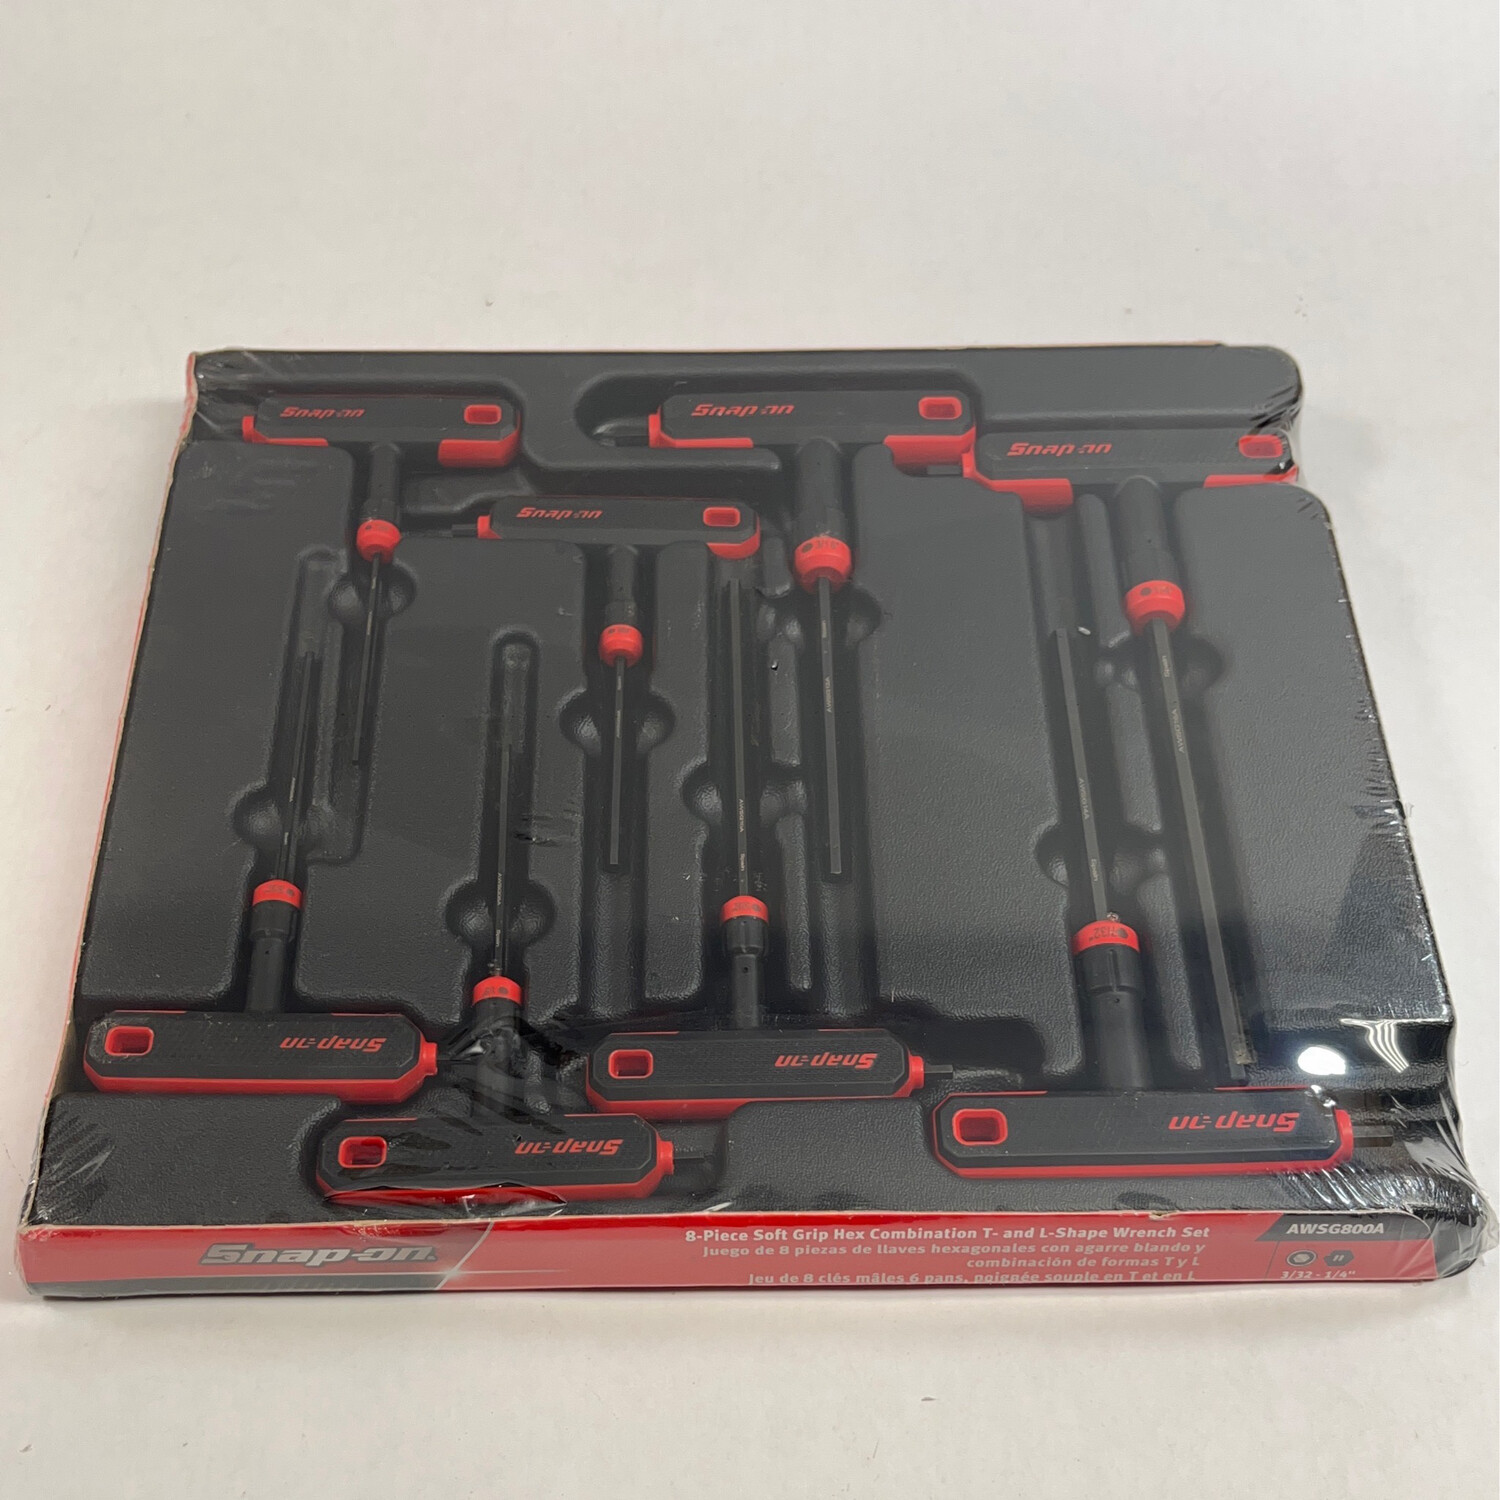 Snap On 8 Pc. SAE T-Shaped/ L-Shaped Combination Hex Wrench Set (3/32-1/4